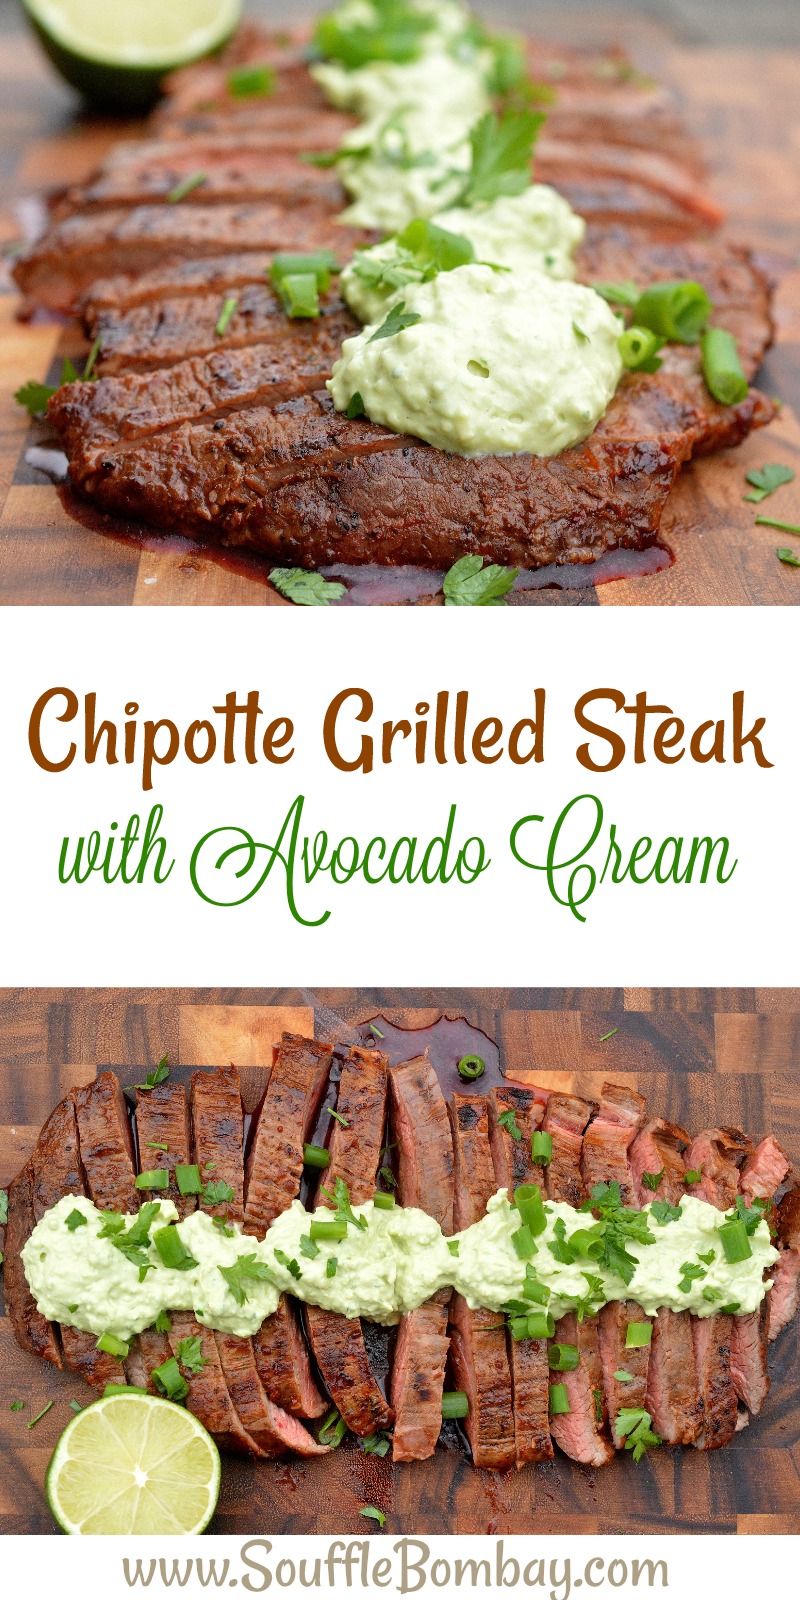 Chipotle Grilled Steak with Avocado Cream A delicious way to dress up a steak that will impress!